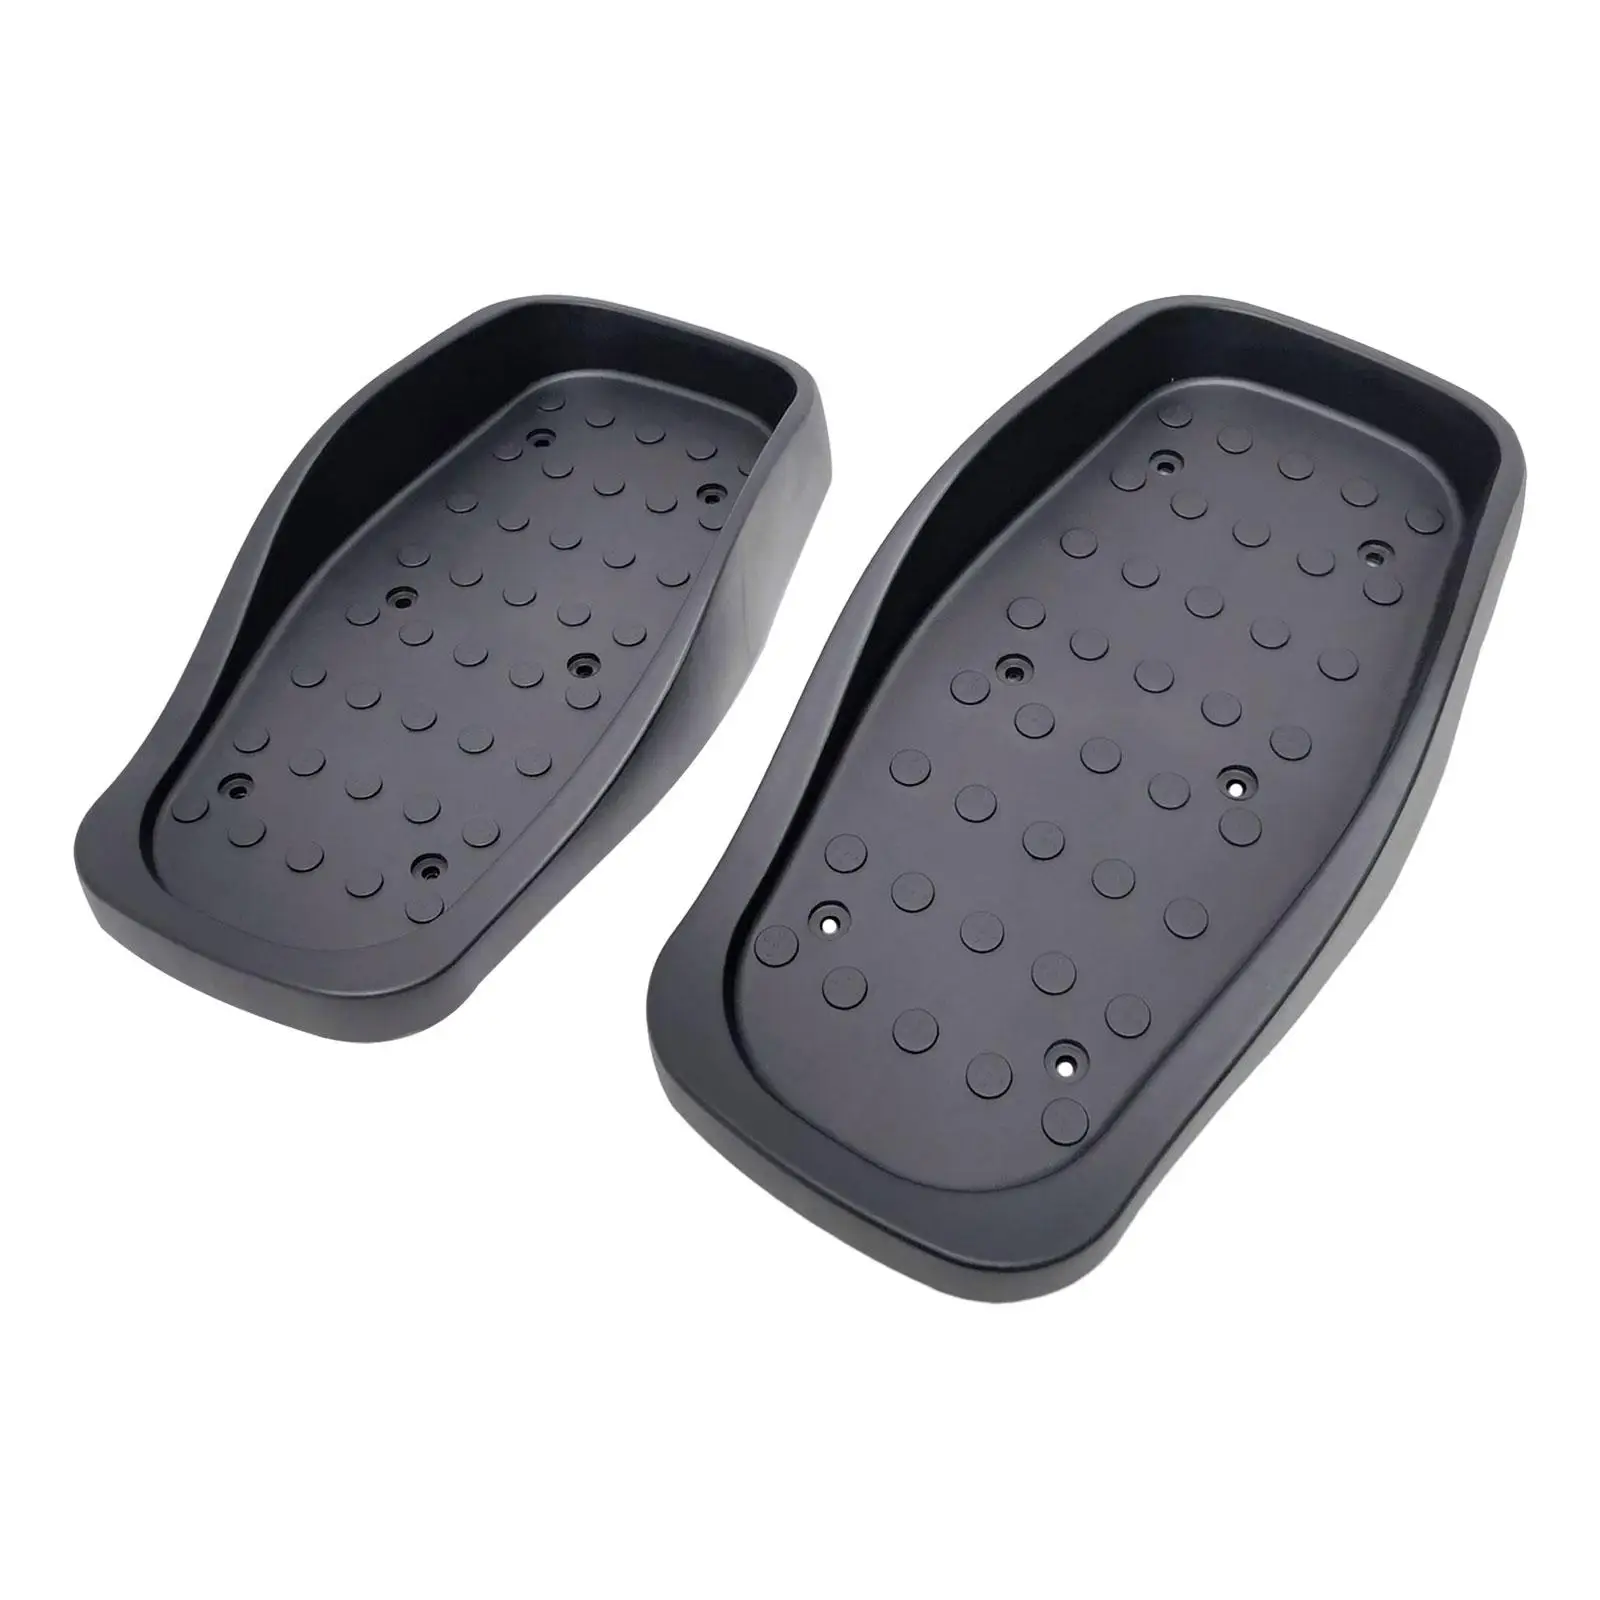 2x Elliptical Machine Pedals Replacement Footboard for Workout Home Use